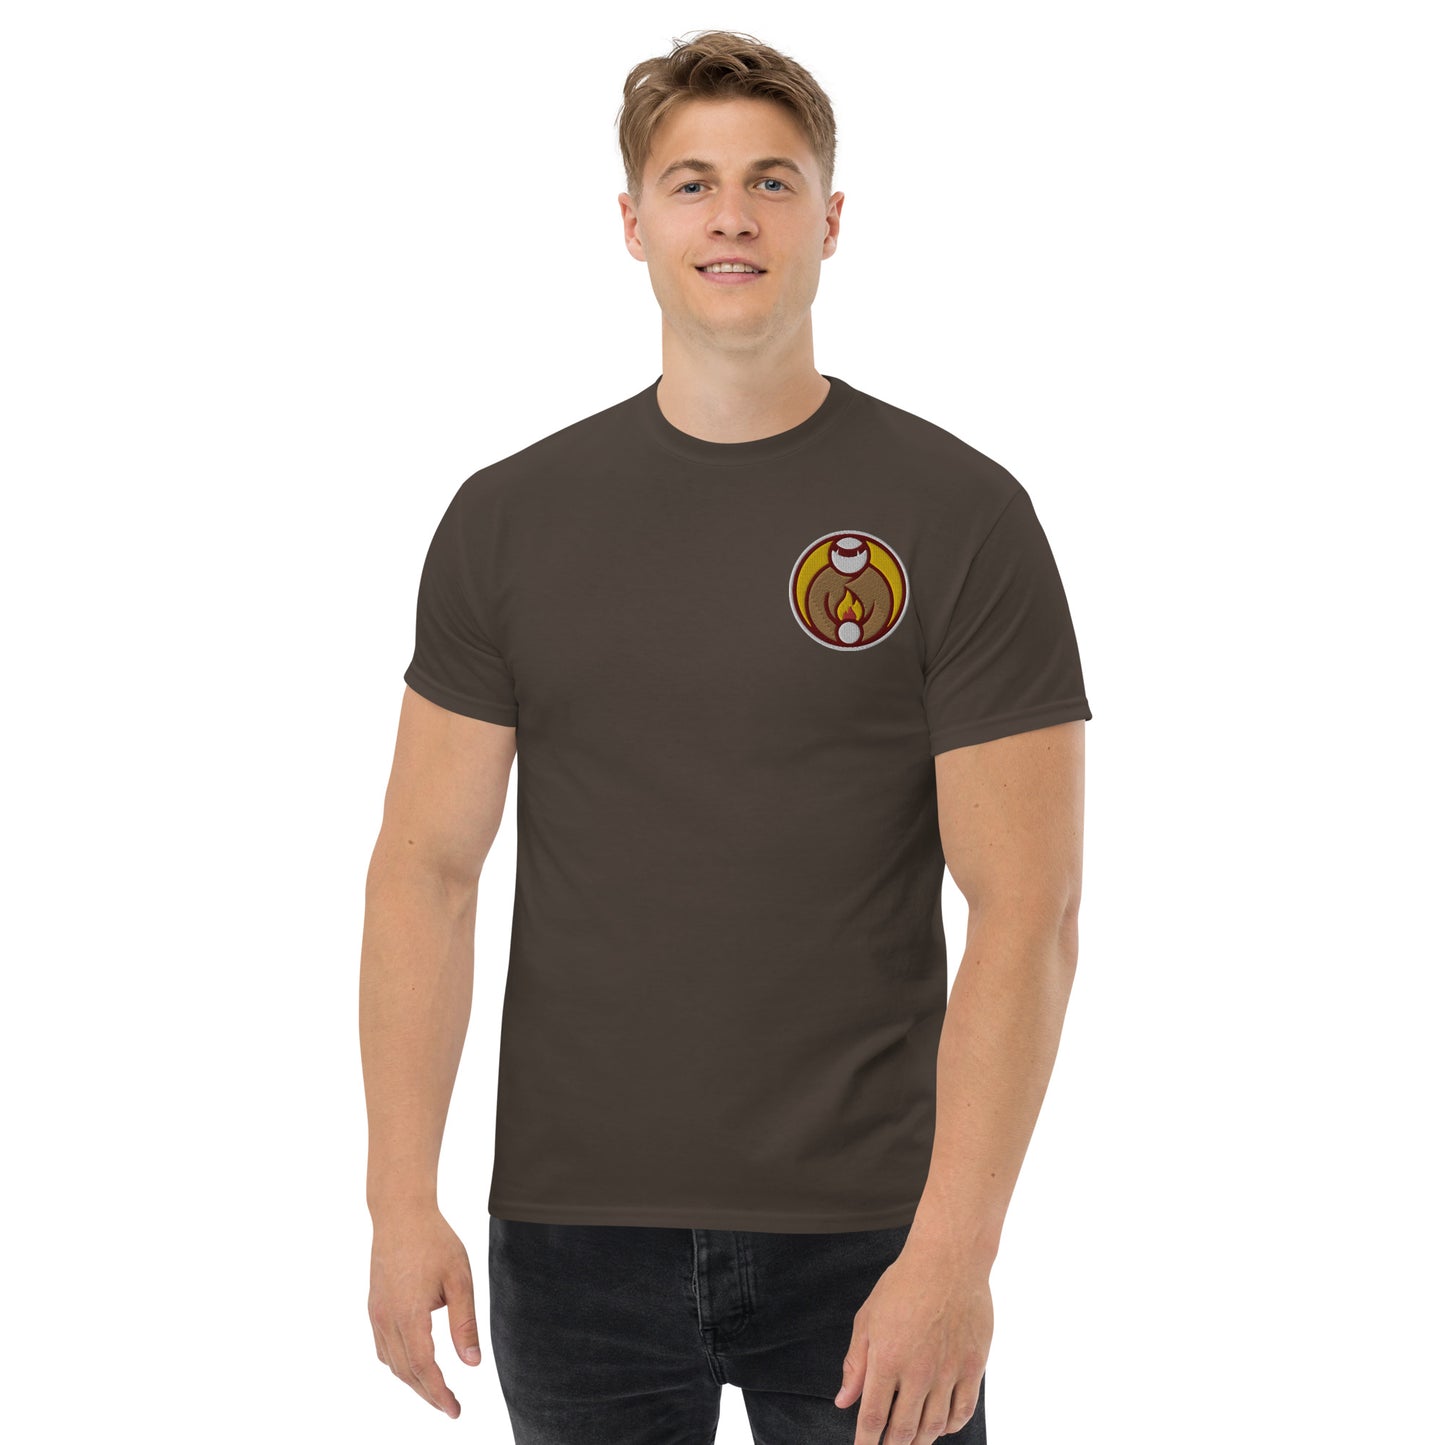 Friar Roast Official Men's Tee - All Colors